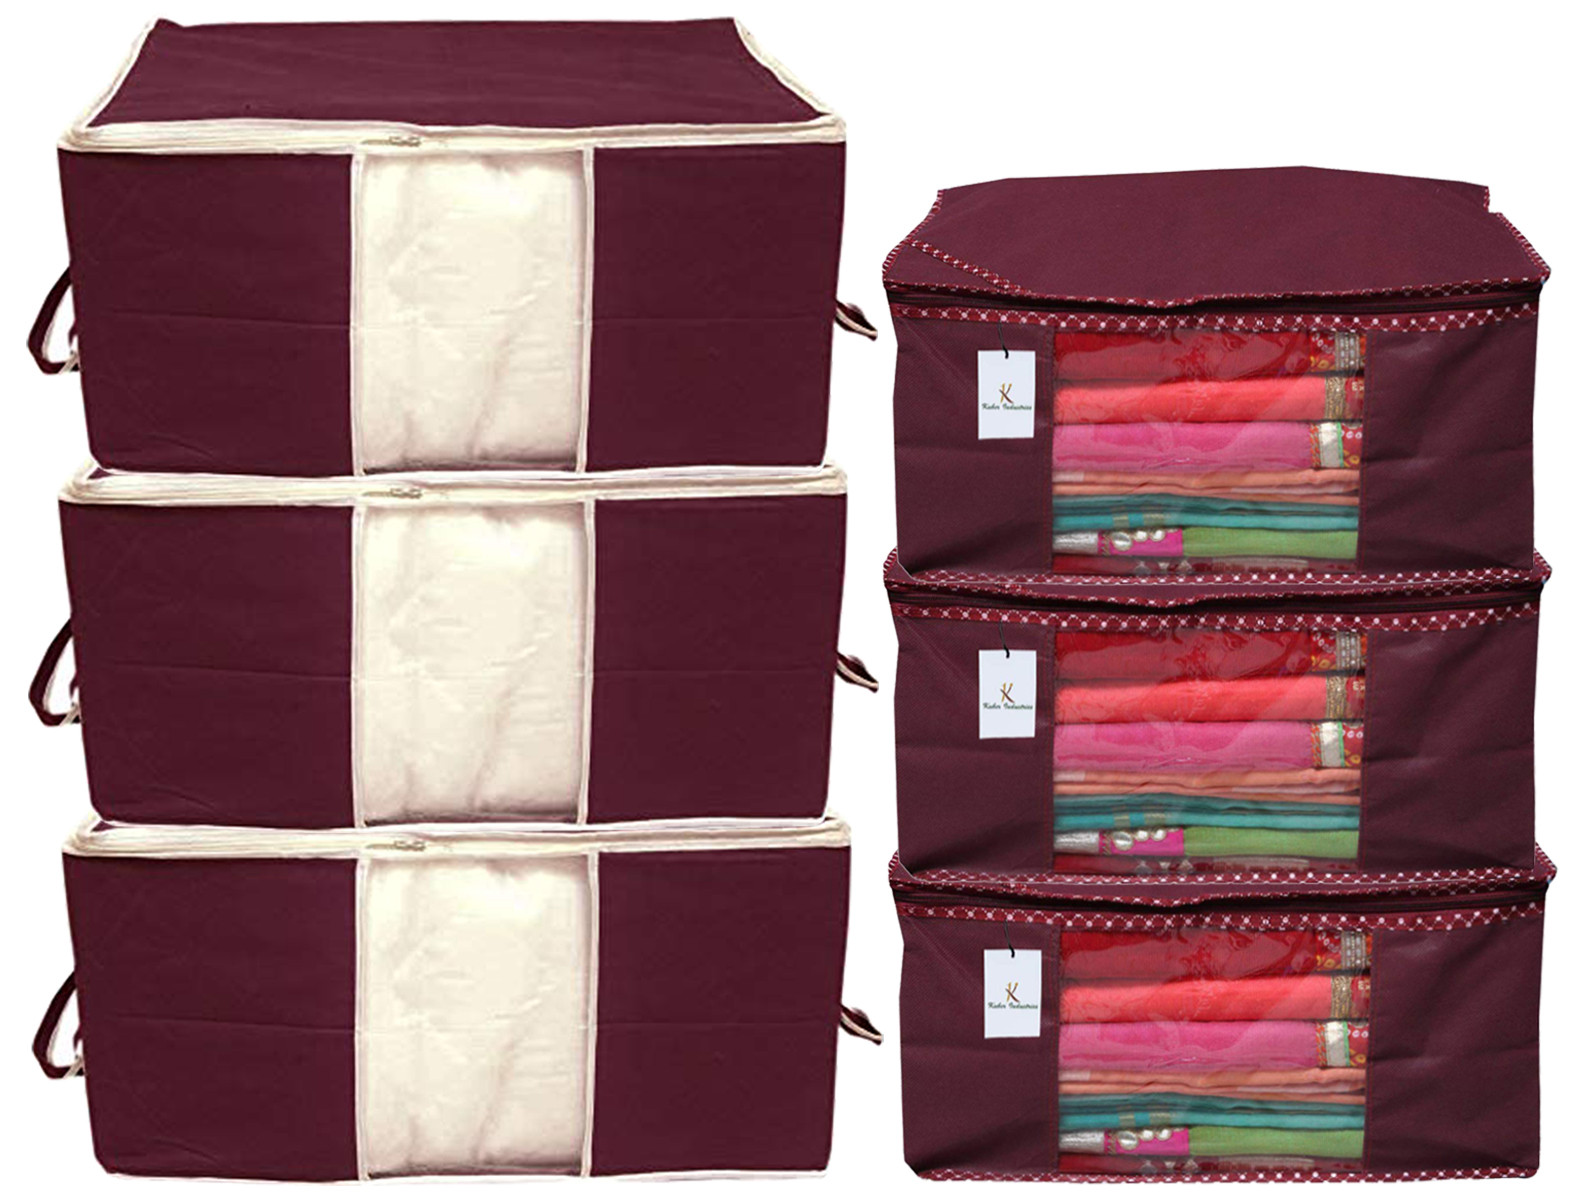 Kuber Industries Non Woven Saree Cover And Underbed Storage Bag, Cloth Organizer For Storage, Blanket Cover Combo Set (Maroon) -CTKTC38451